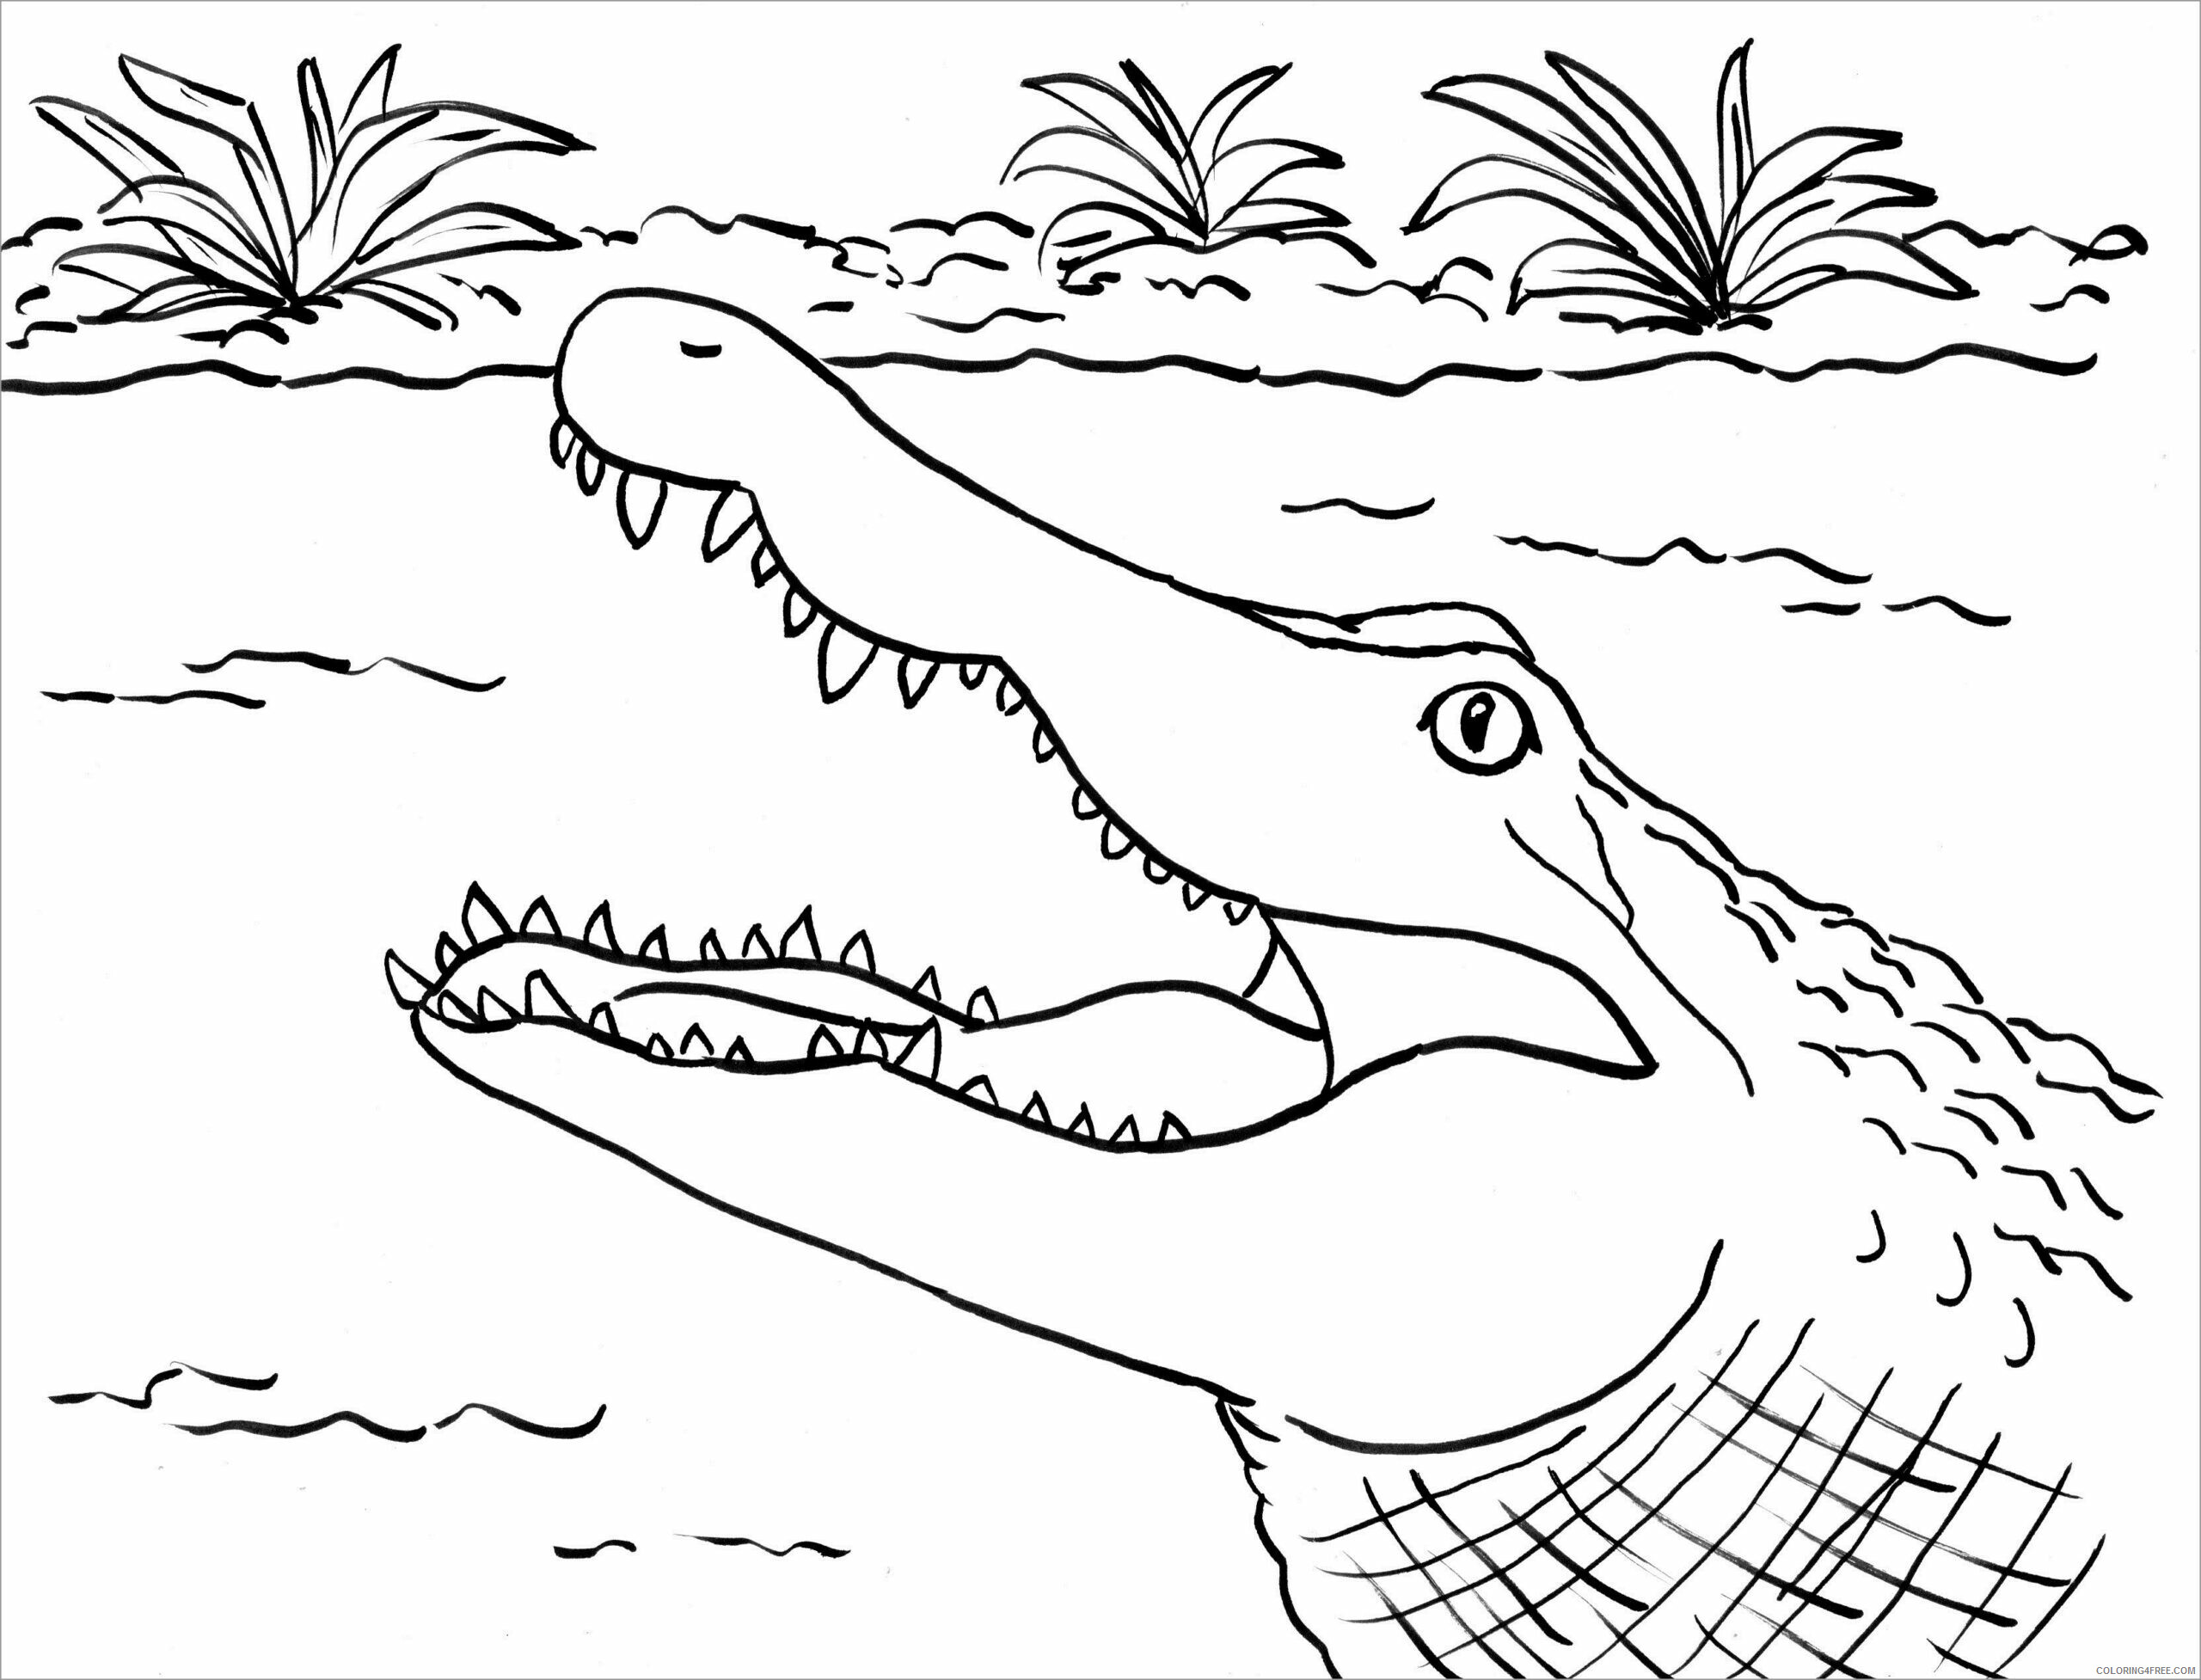 Alligator Coloring Pages Animal Printable Sheets alligator head 2021 0057 Coloring4free